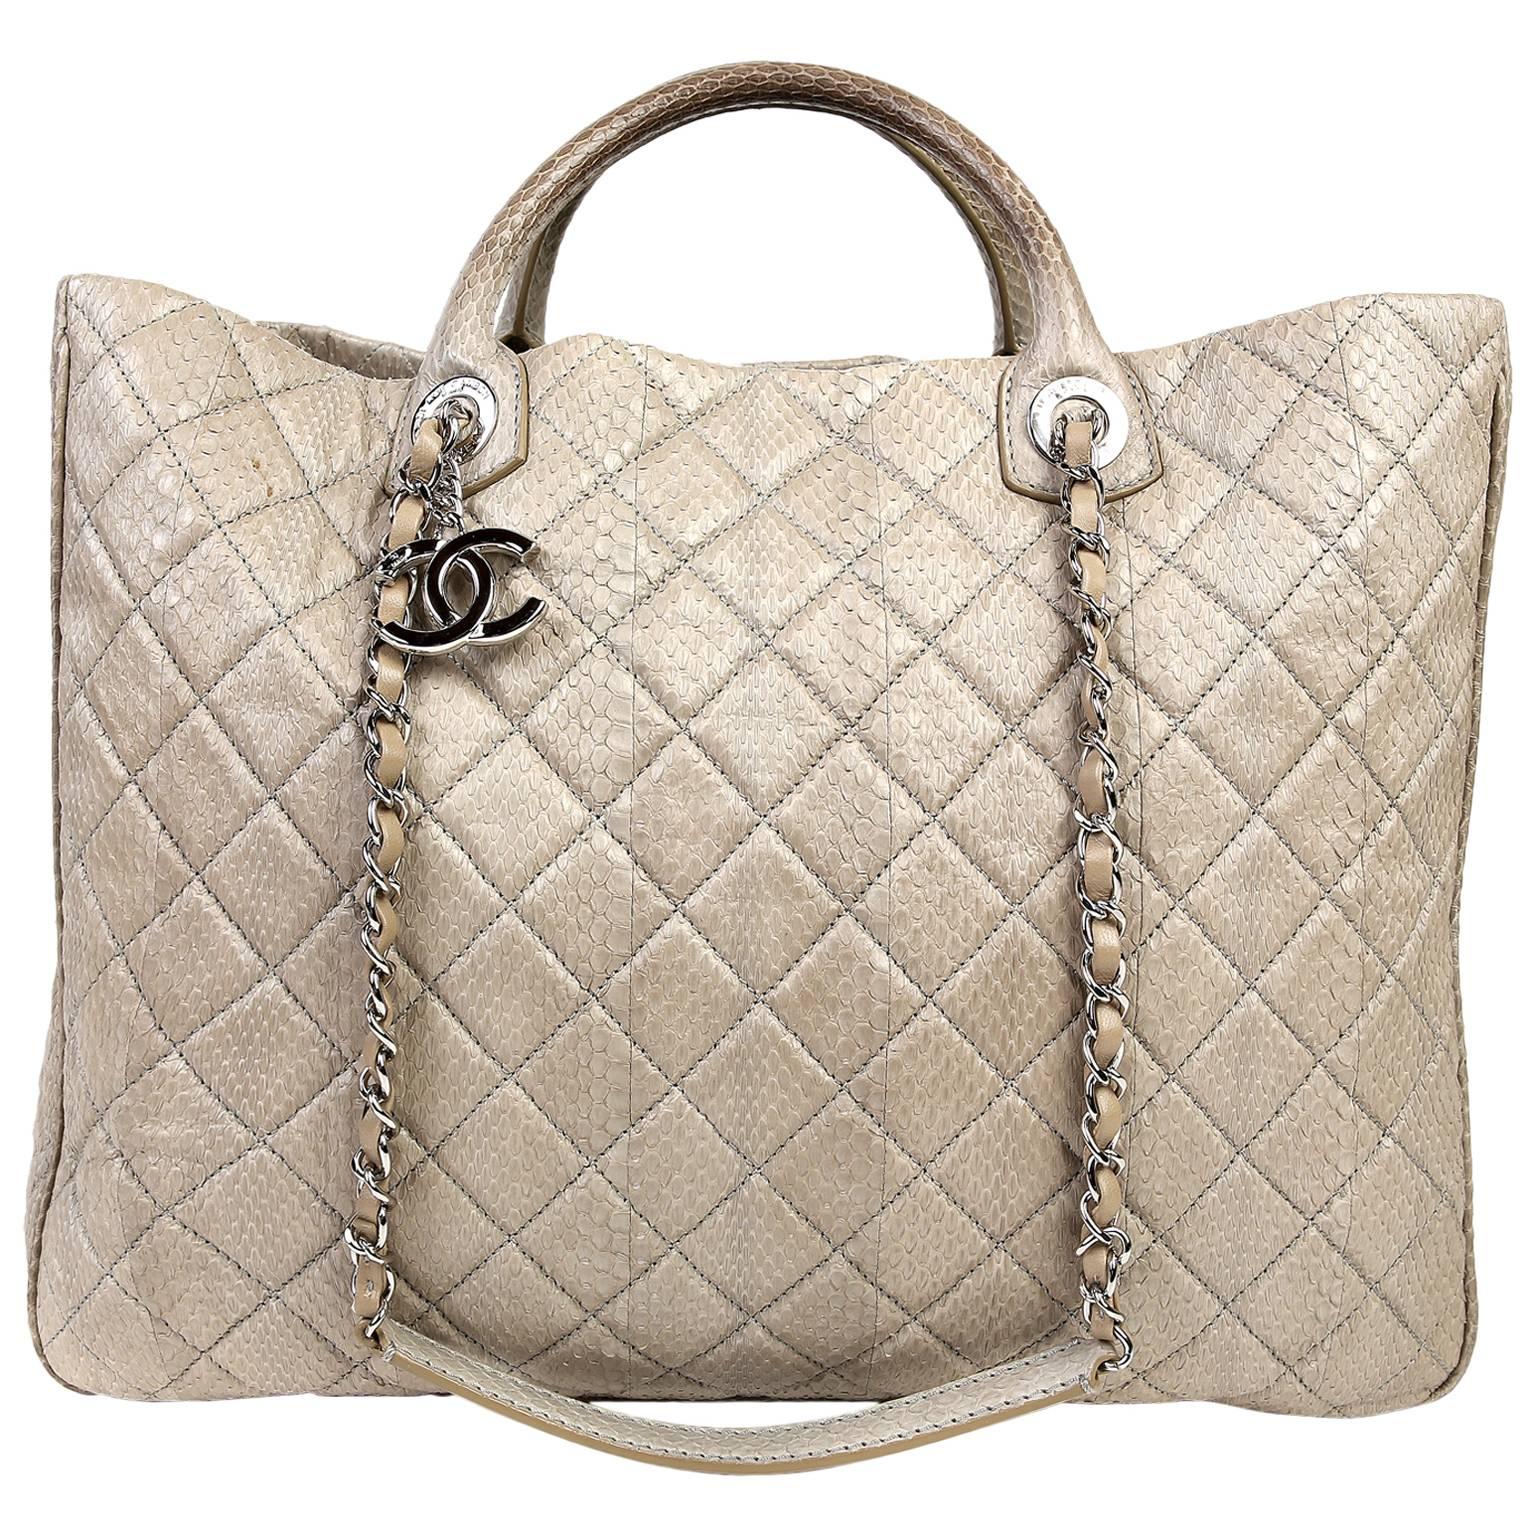 Chanel Taupe Python Large Shopper Tote